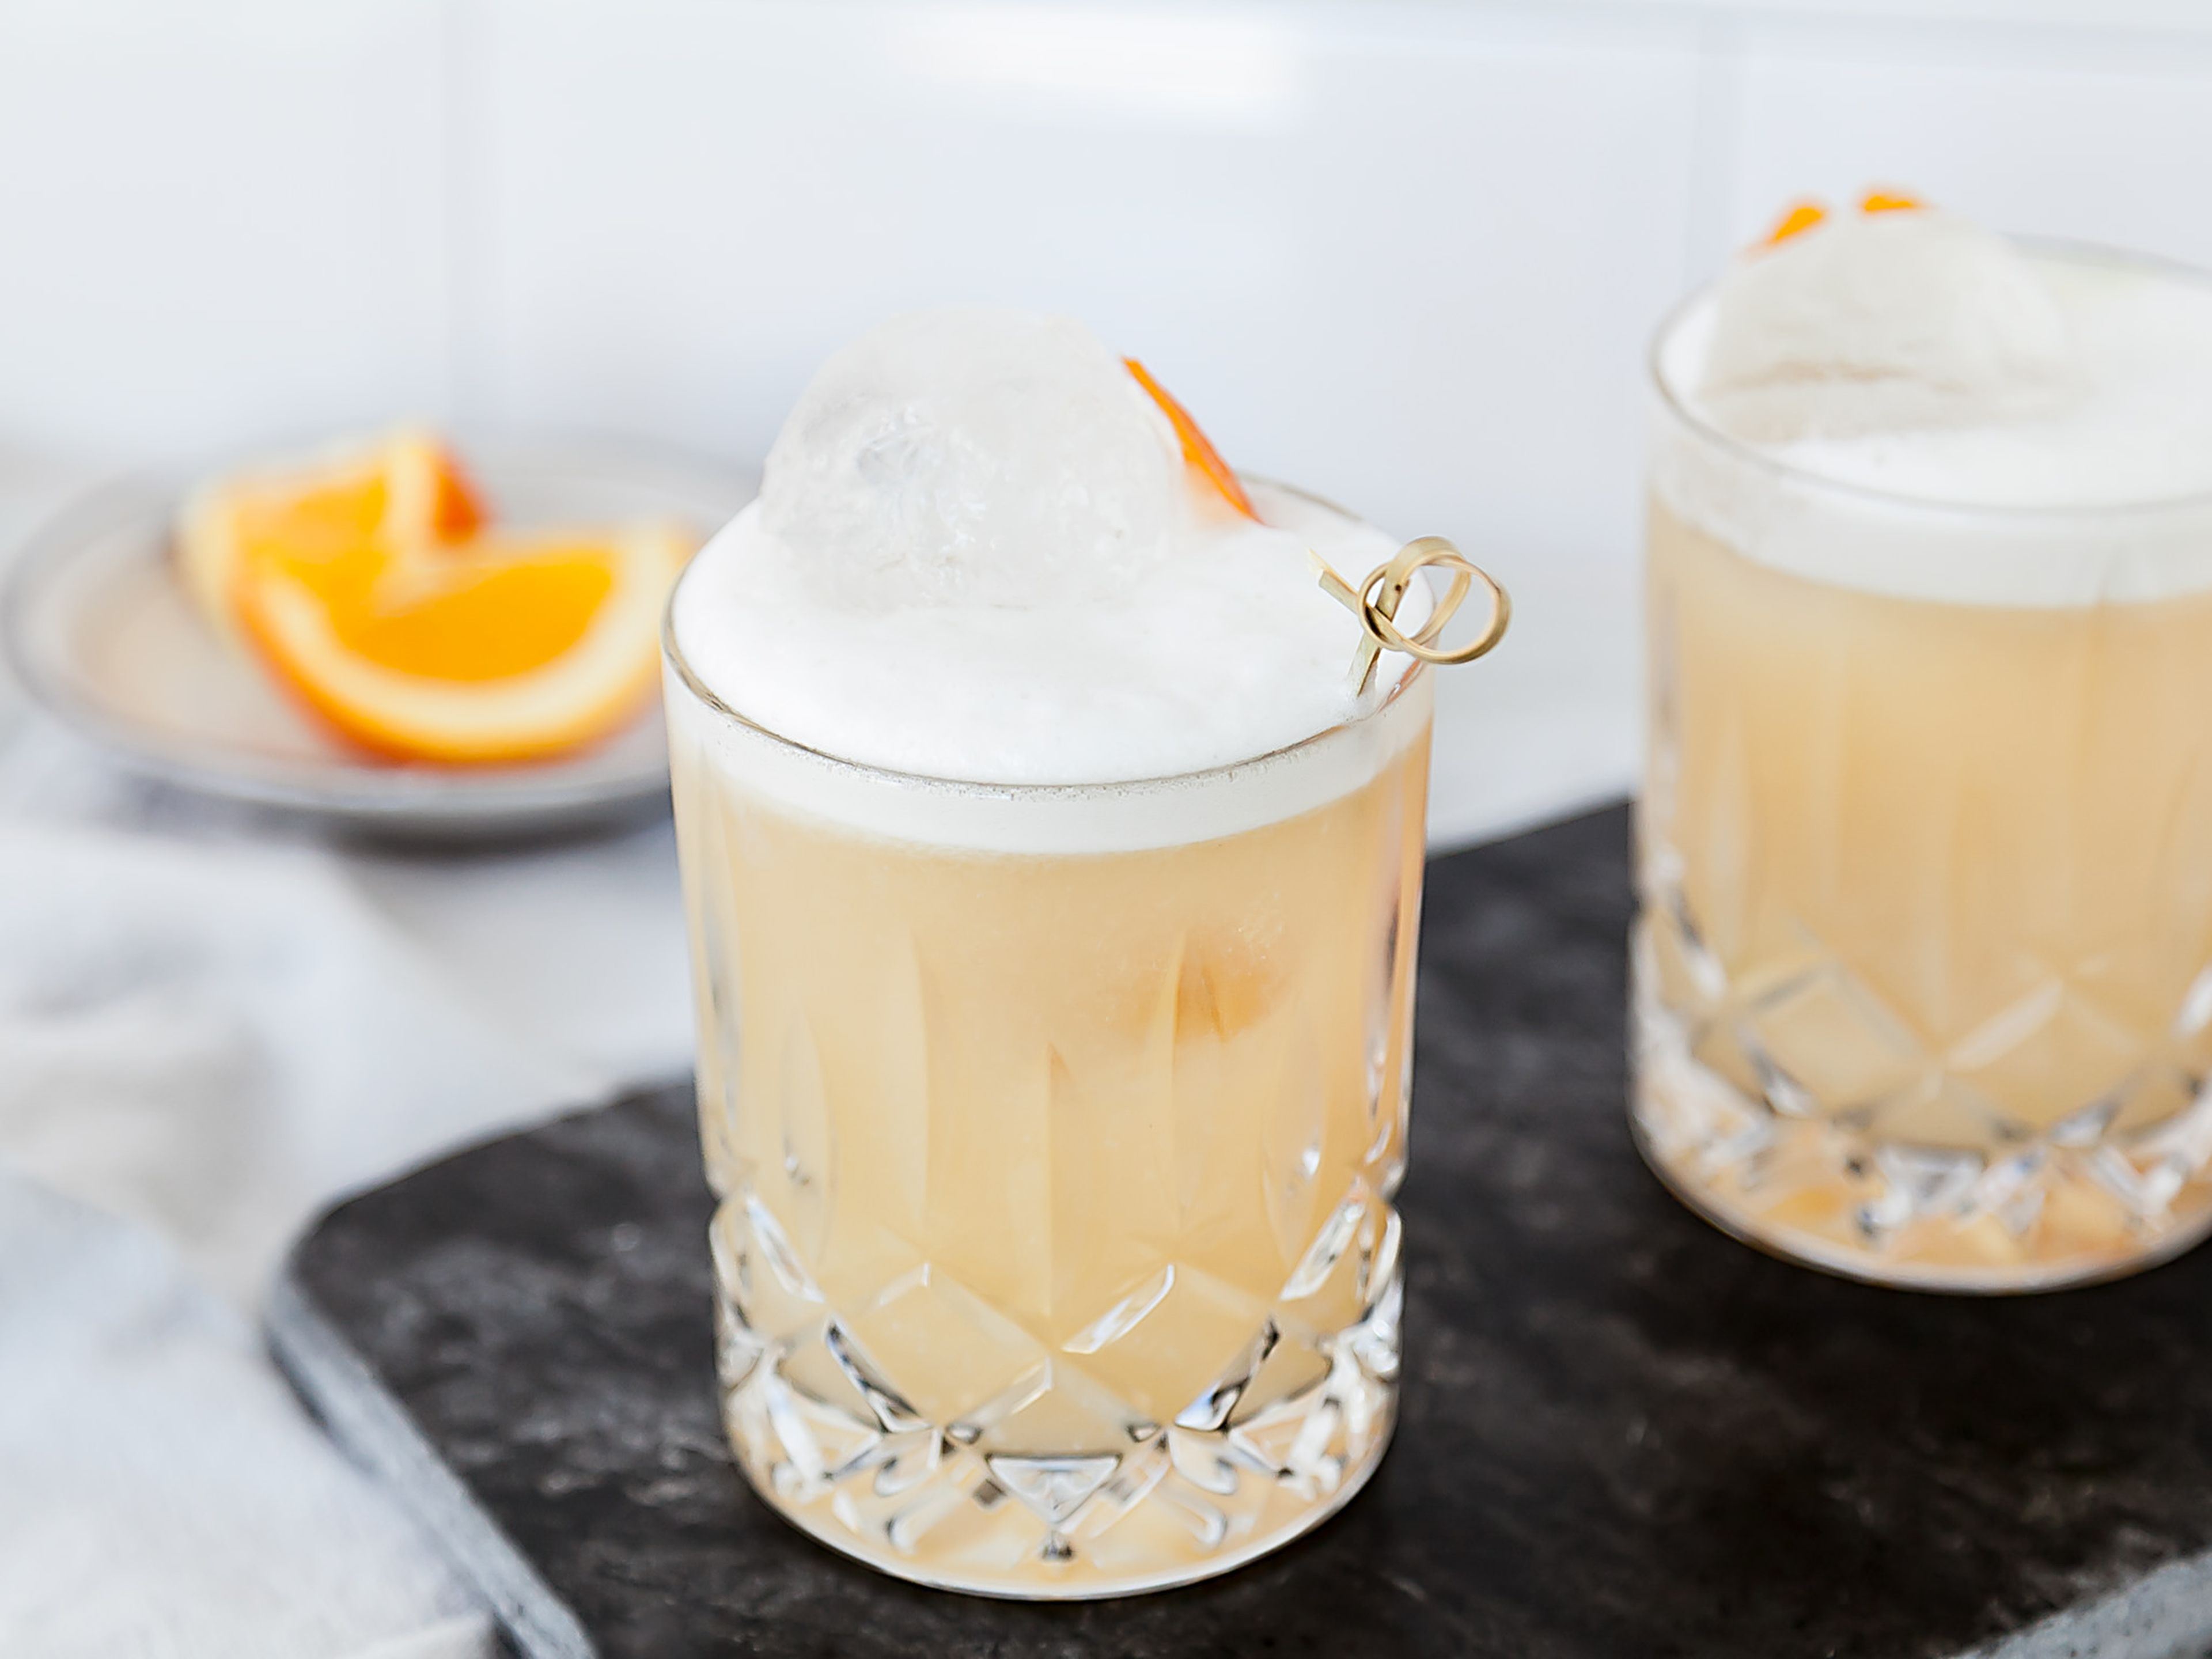 Classic whiskey sour